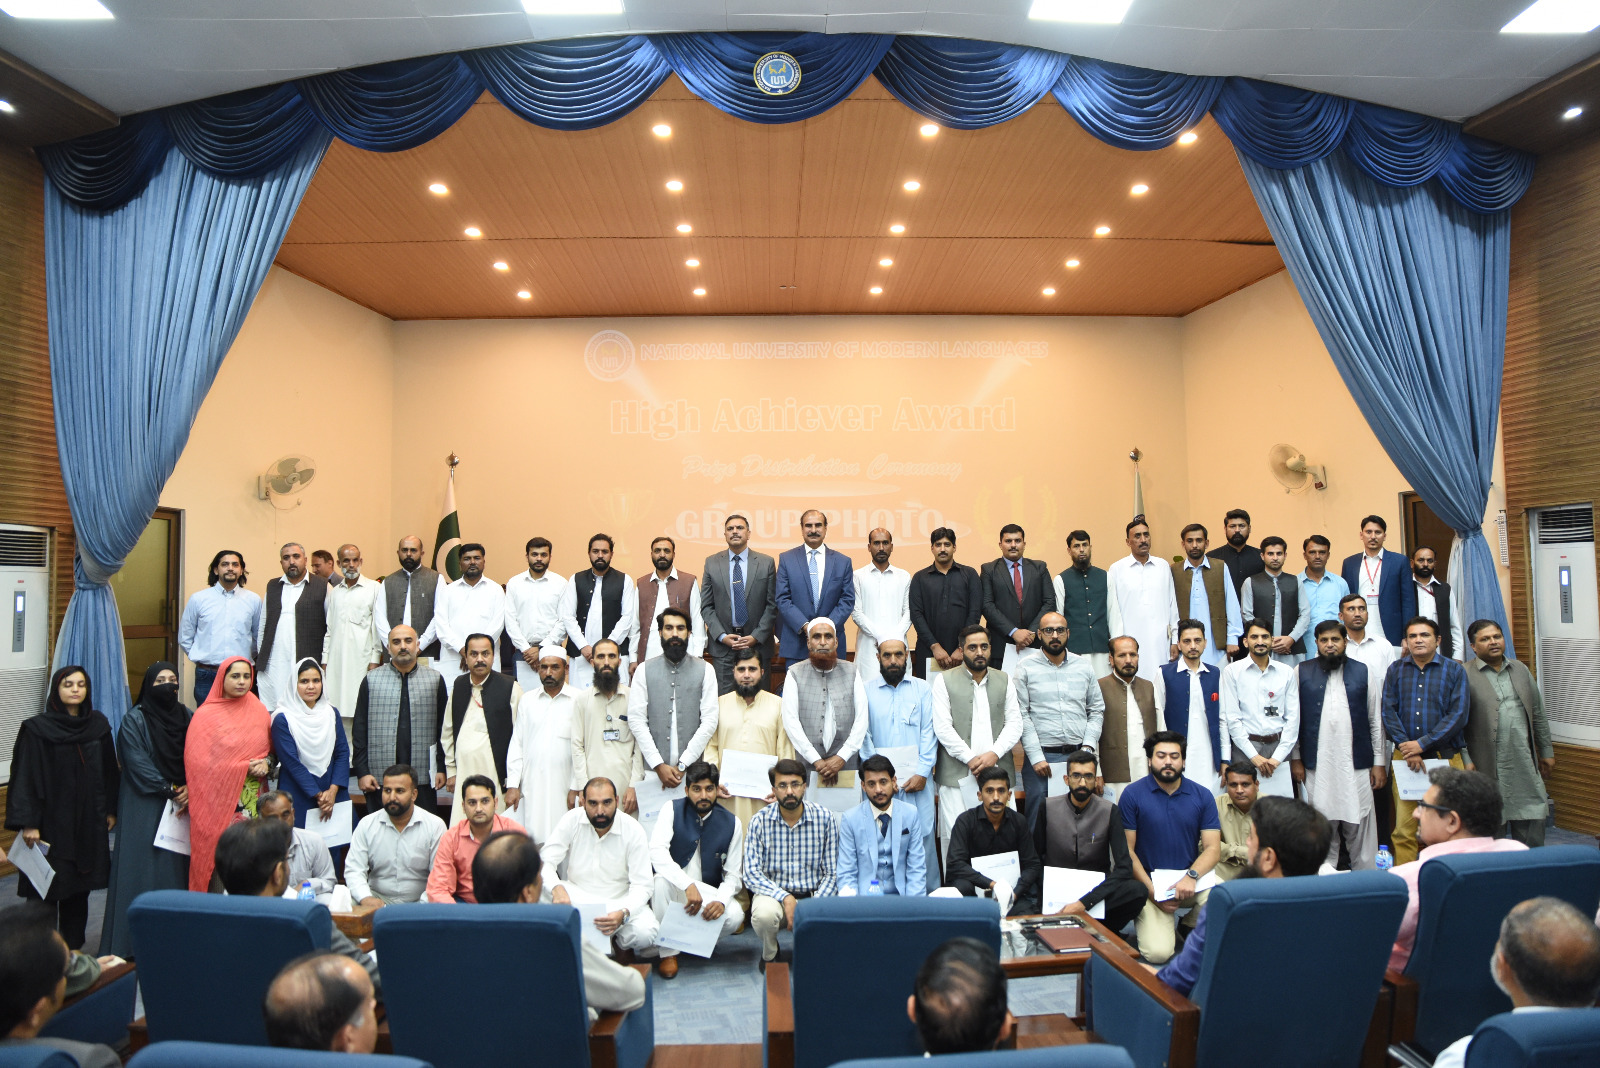 High Achievers Award Ceremony was held at Main Campus of NUML on Sep 20, 2023.